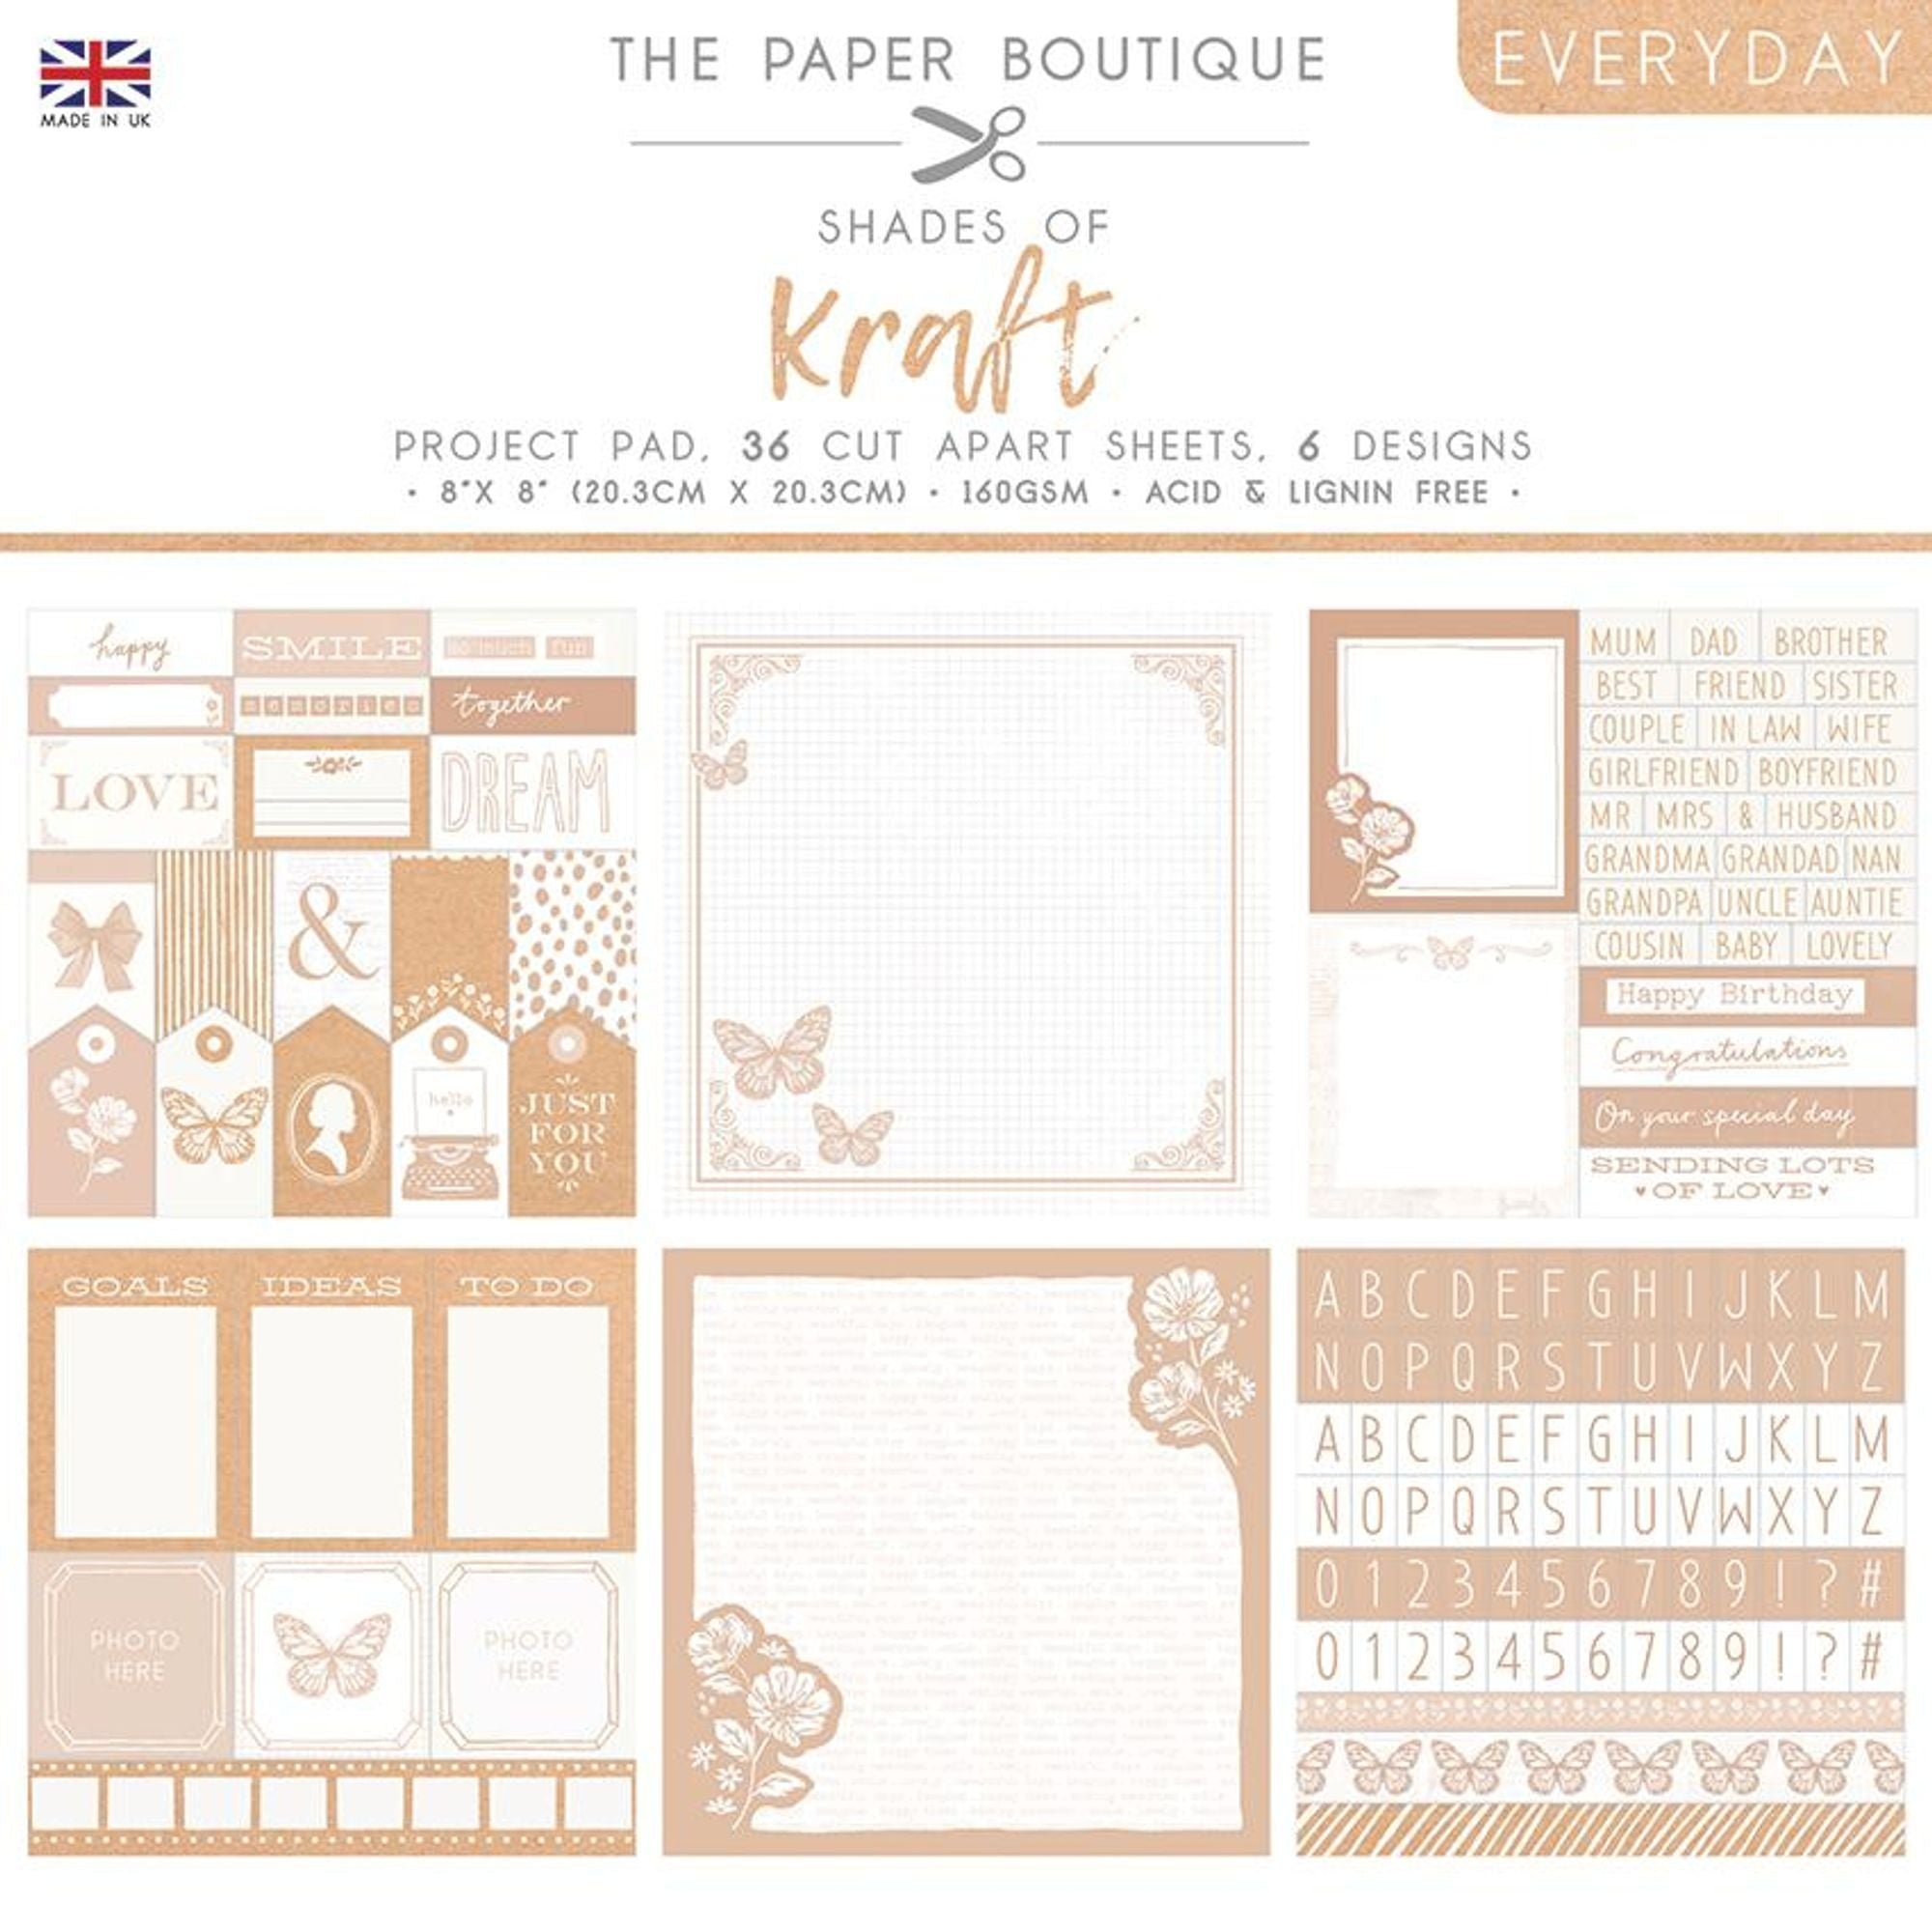 The Paper Boutique Everyday - Shades Of - Kraft 8 in x 8 in Project Pad